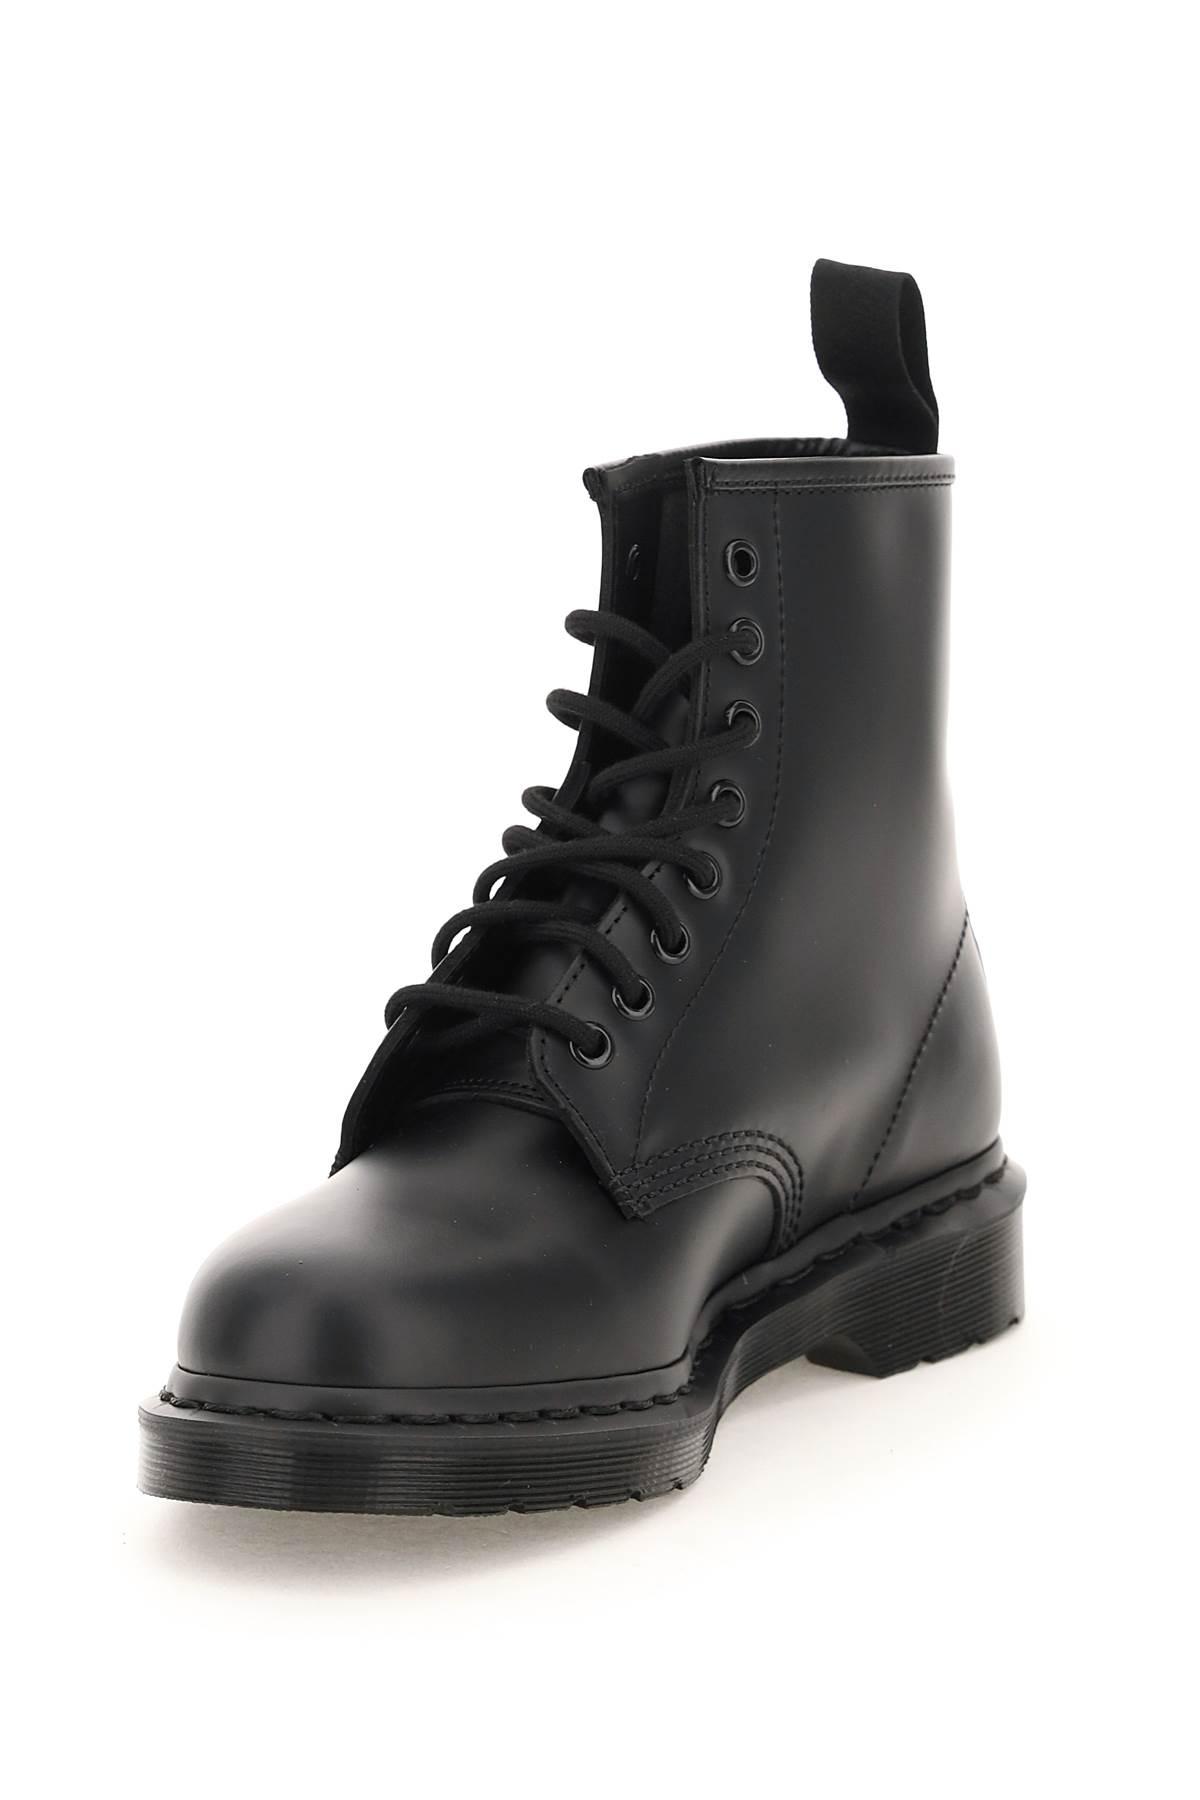 Dr. Martens Leather 1460 Mono Smooth Lace-up Combat Boots in Black 